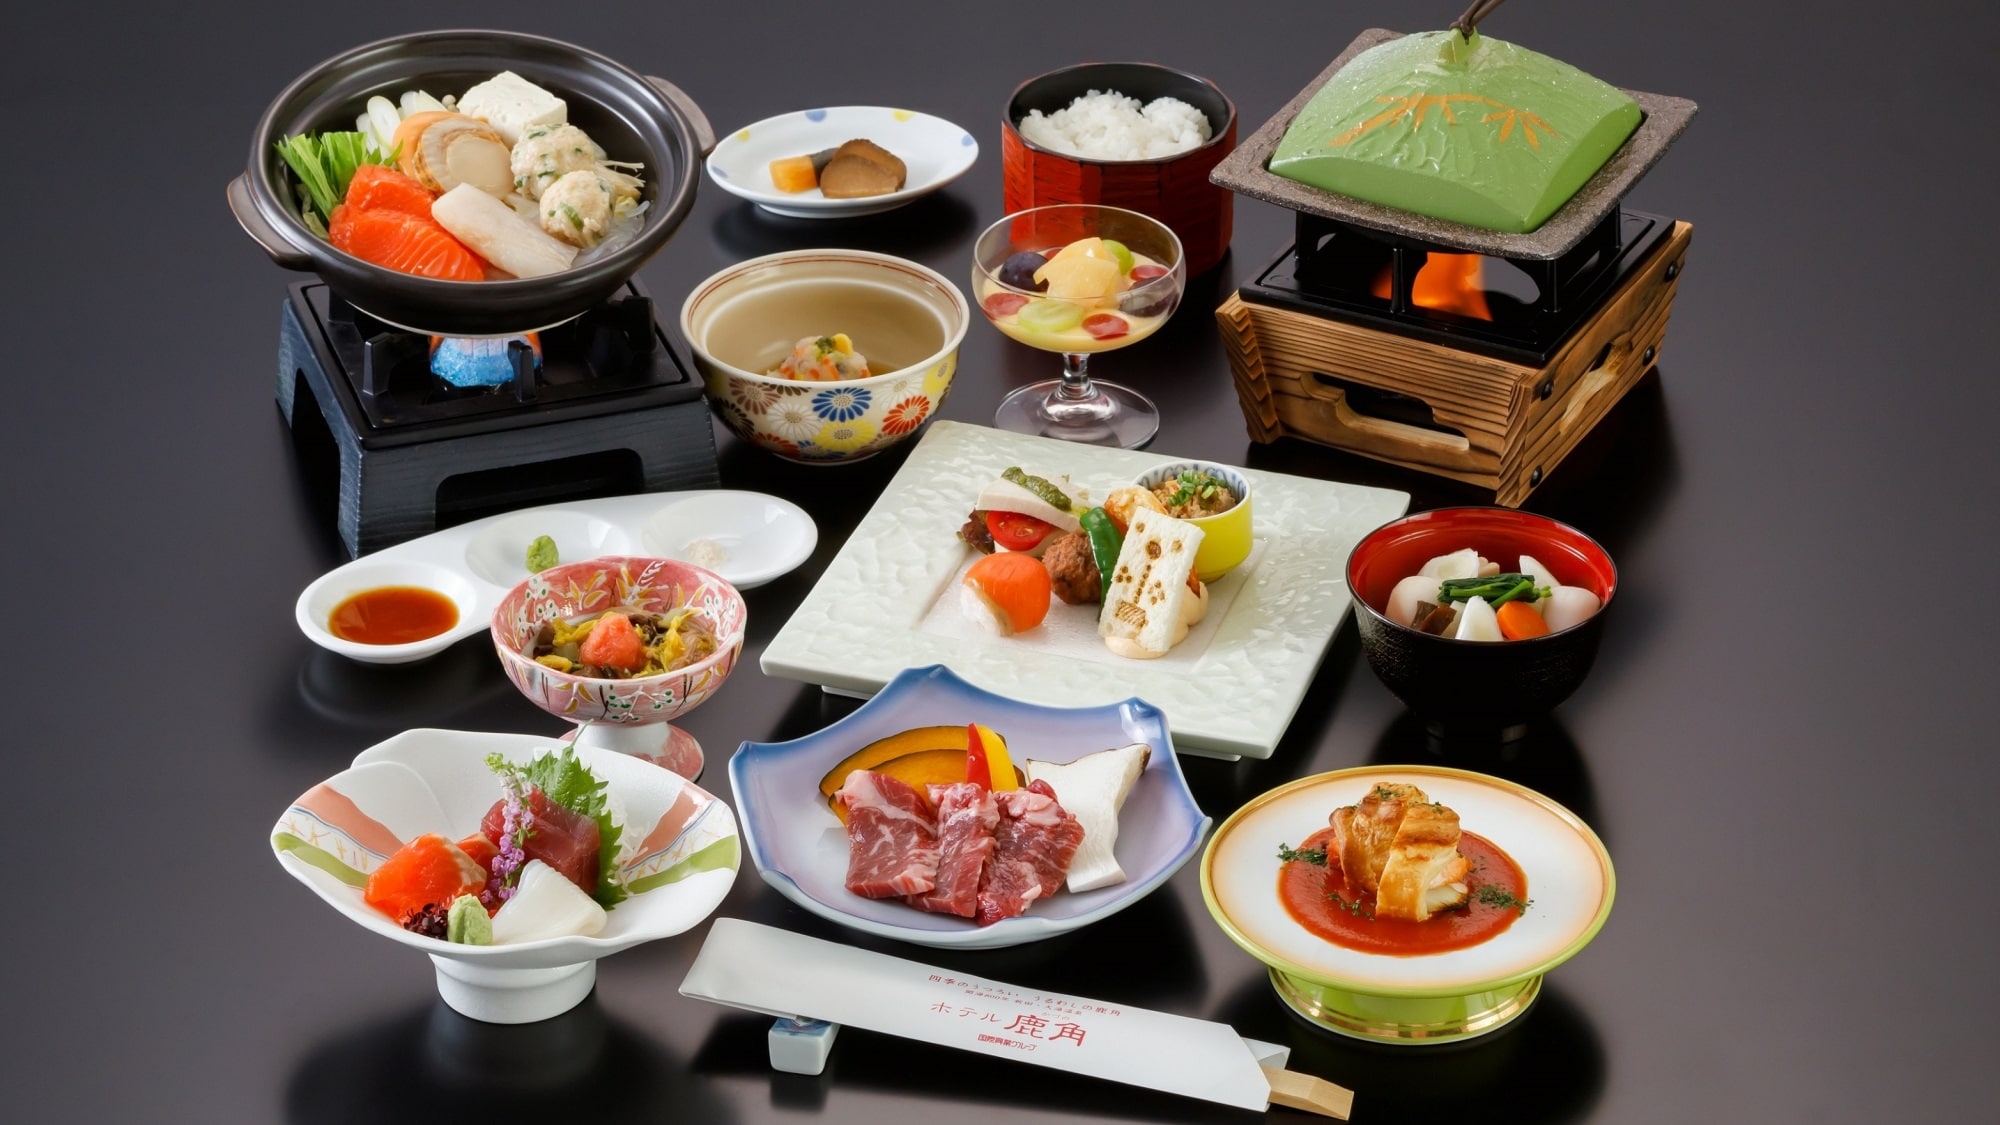 Example of “Komachi Course” dishes